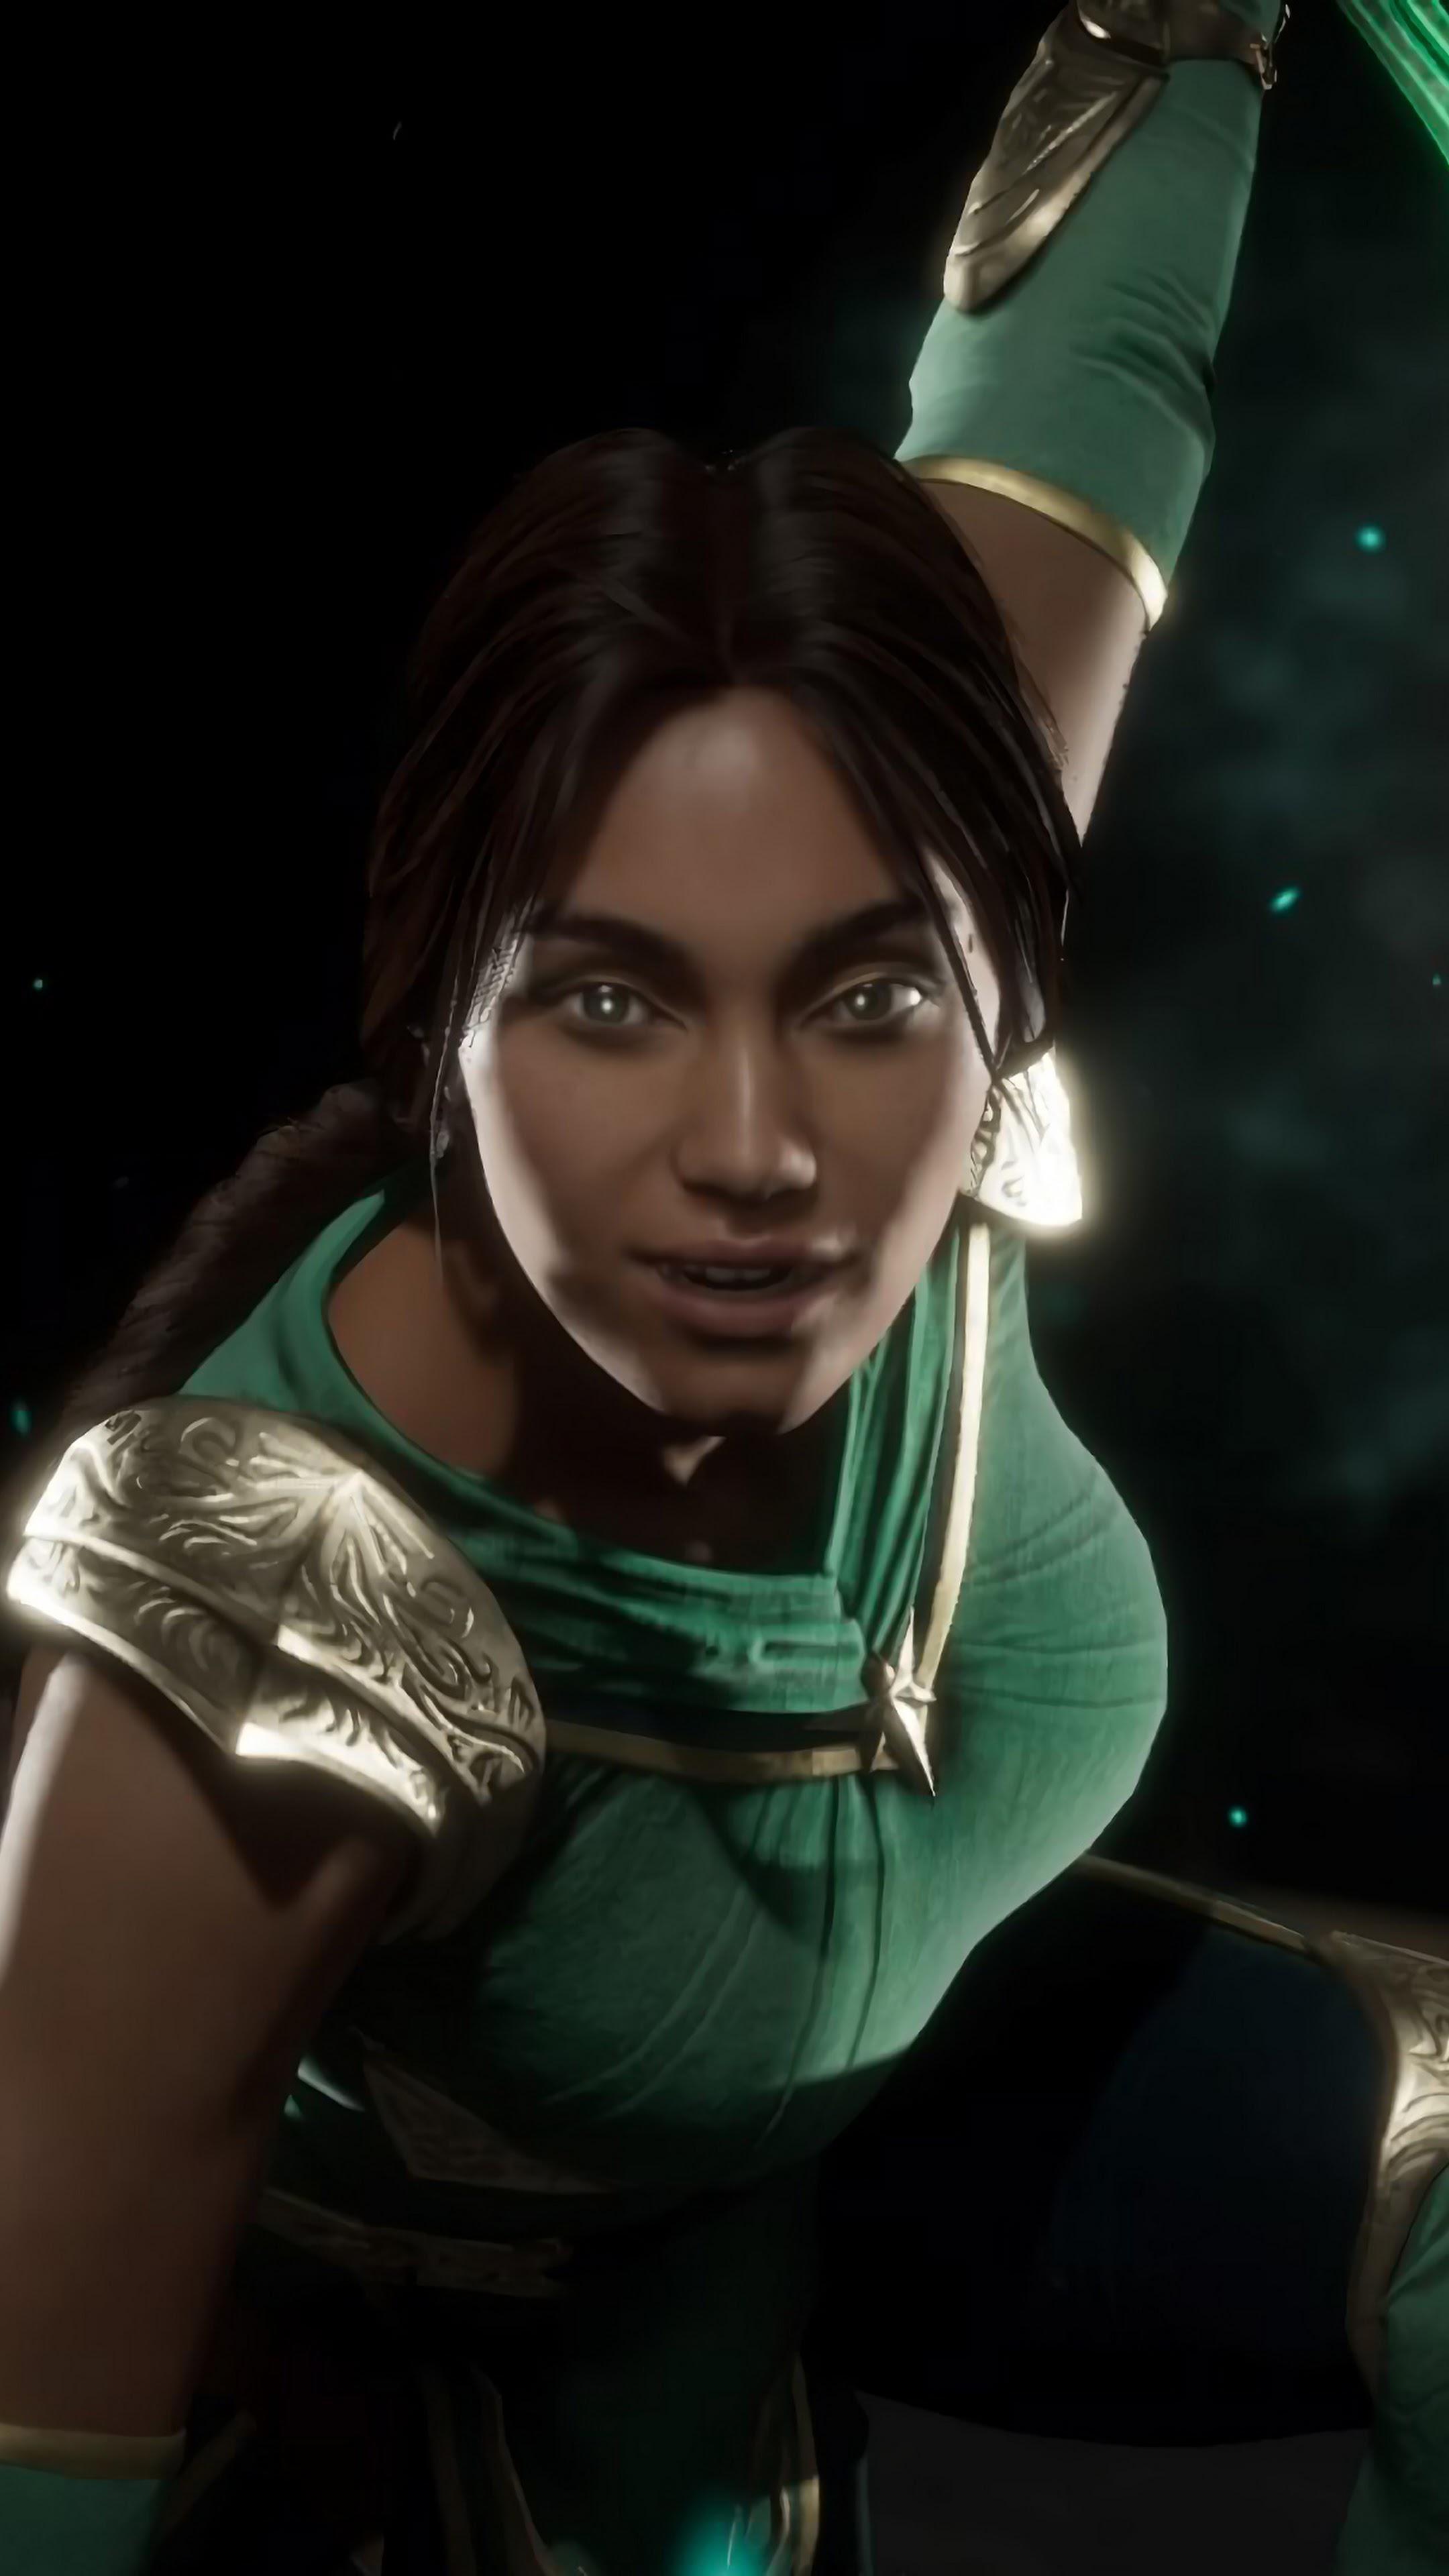 Jade from mk11 wallpaper as requested :)